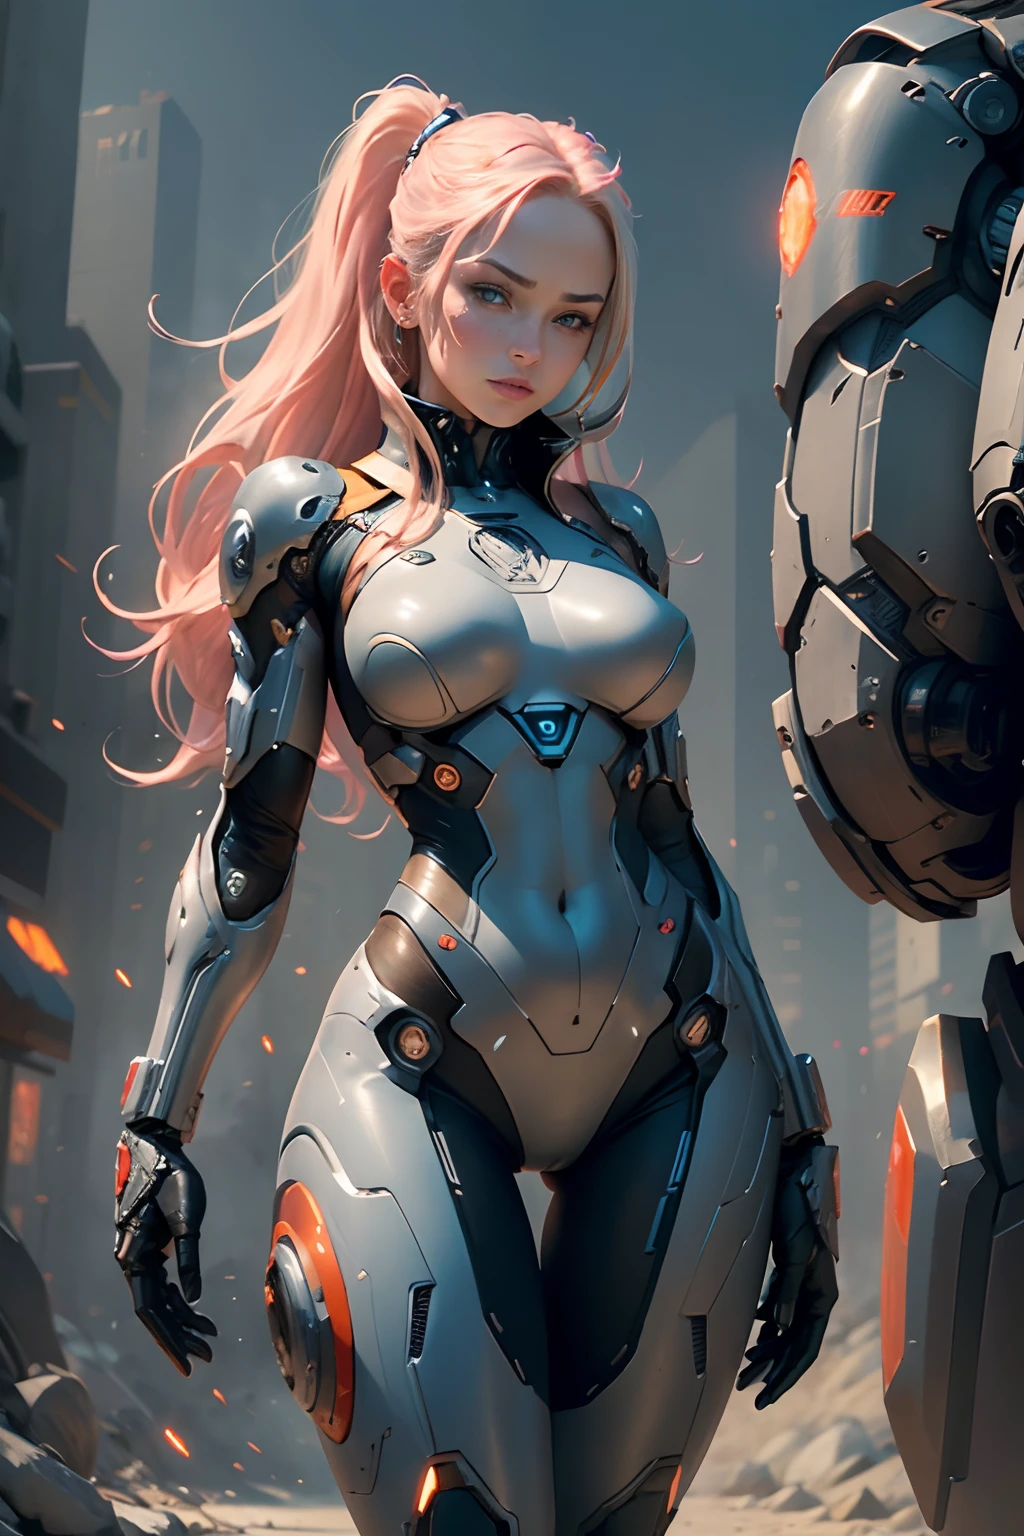 female ,emma frost ,front view,artgerm,full body,cyborg,front pose,heavy mechanical torso,sci fi,full body suit,combat ,gun smith,swat,swat outfit,full tactical ,camo print,powerful pose,sexy,Sultry, , anime-inspired, ample bosom, strikingly detailed,dynamic stance, gradient backdrop, intricate texturing, sensual curves, immaculate detailing, close-up shot, iconic character design, nuanced shading, empowered posing,artgerm,full body,sci-fi suit,futuristic,cyberpunk,red and orange(outstanding, professional, surreal), towering buildings rise from the ground to form a magnificent landscape of the futuristic city. In the center of the picture, a huge and magnificent robot mech stands tall. Its pink metal shell shimmers, and the delicate textures and intricate lines of the robot mech outline its high-tech figure. The robot mech is tall, exuding an unparalleled sense of majesty and power. The robot mech has bright LED lights embedded in its shoulders, flashing in various bright colors, like the bright stars of the future city. Its arms are equipped with powerful energy weapons and are ready to meet the challenges of battle. Standing next to the robot, we see a striking teenage girl. She wears a black leather jacket and close-fitting black stockings, highlighting her perfect figure. The texture of the black leather jacket contrasts with the metallic texture of the robot, showing a unique visual effect. The girl's firm and resolute eyes show that she is fearless, (the girl is in good shape, wearing leather clothes, showing her navel, medium breasts, and clear facial details)